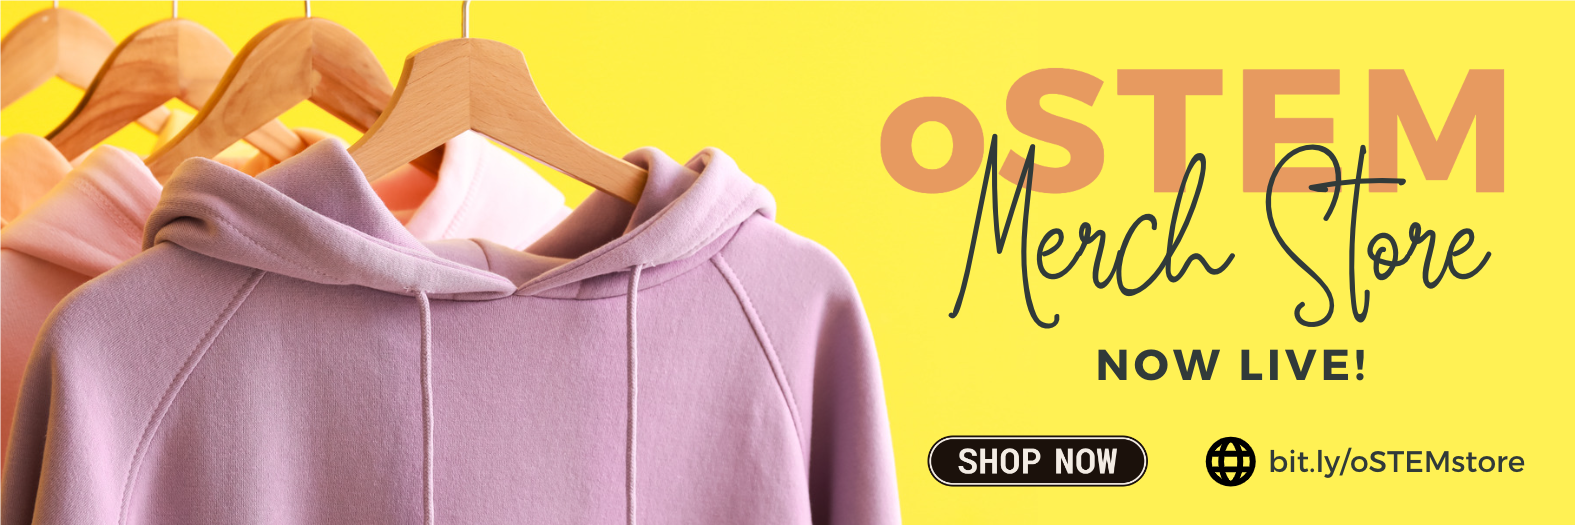 oSTEM Merch Store is now live!